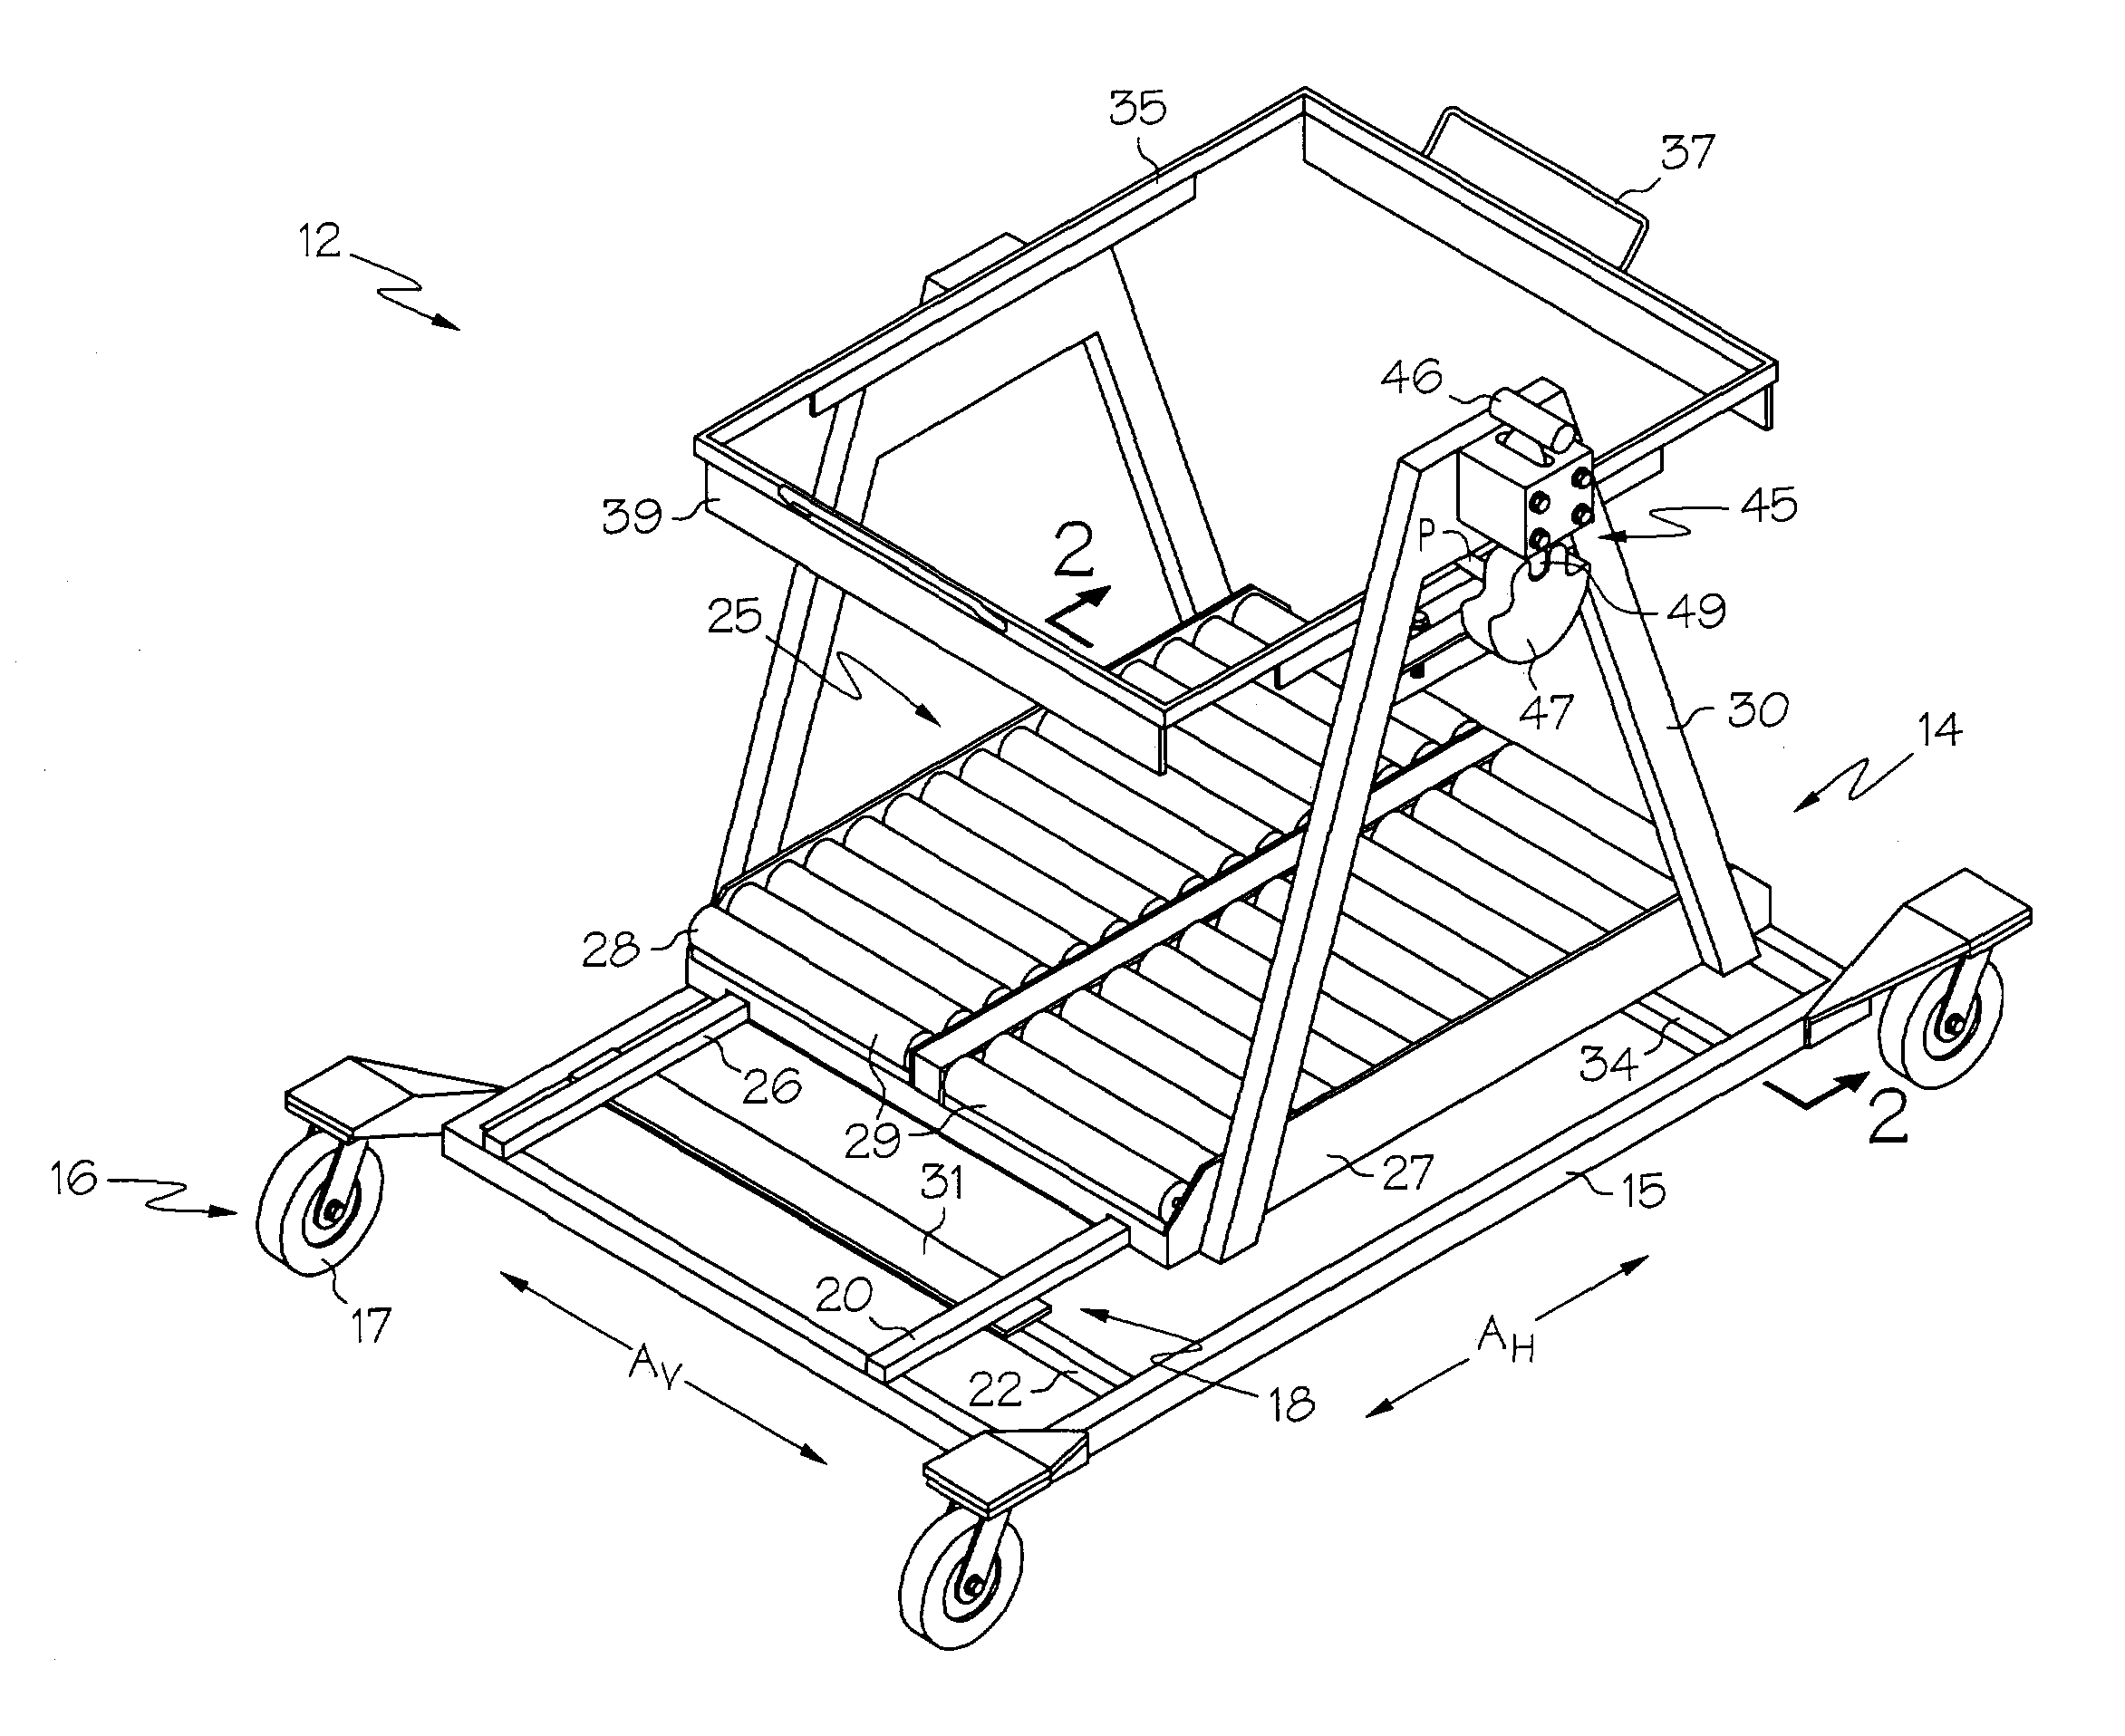 Dolly device for loading containers